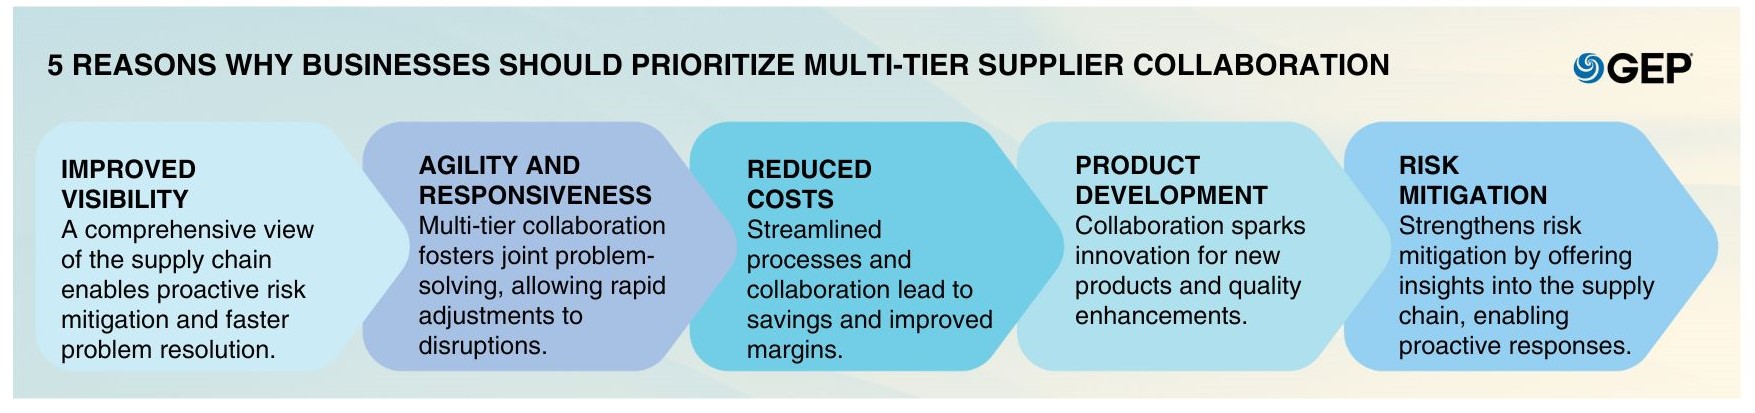 why-multi-tier-supplier-collaboration-is-vital-to-building-supply-chain-agility-and-efficiency